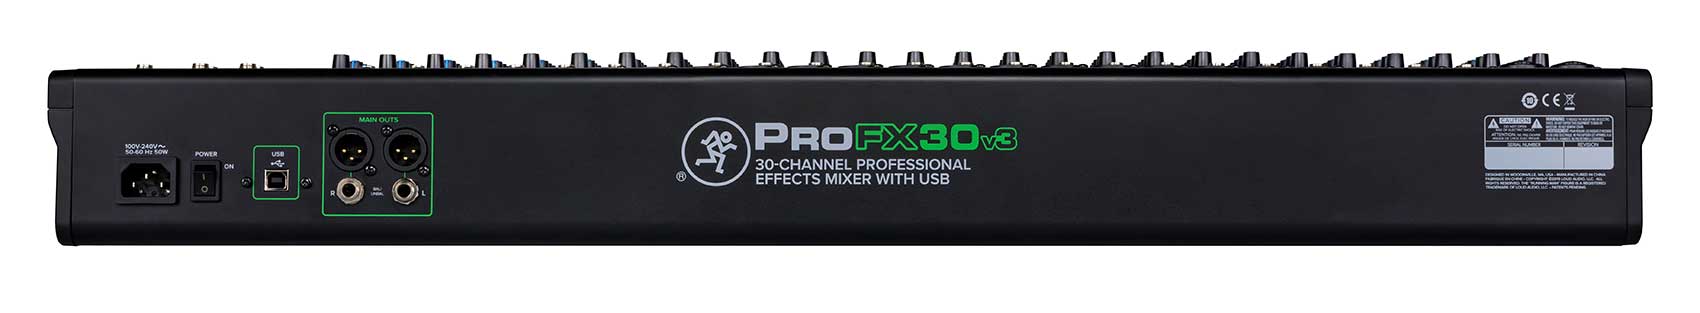 Mackie ProFX30v3 30-Channel 4-Bus Effects Mixer ProFX30 v3+AT2020+AT2021 Mics - image 5 of 13